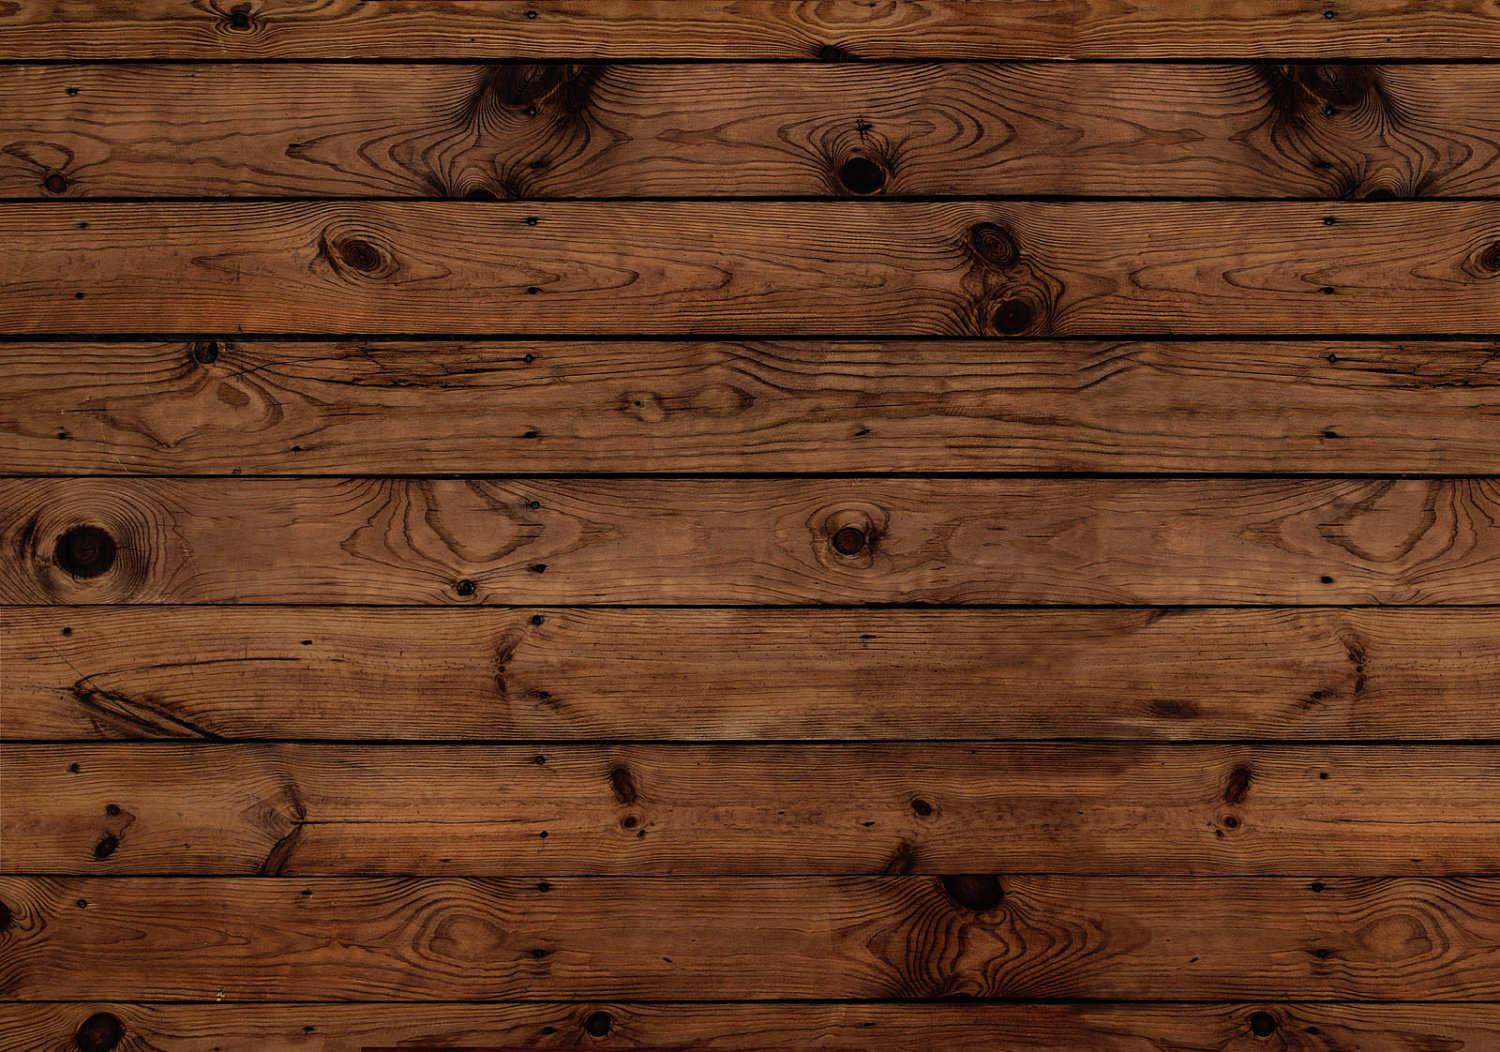 Darkwood Plank Faux Wood Rug Flooring Background or by funlicious 1500x1052